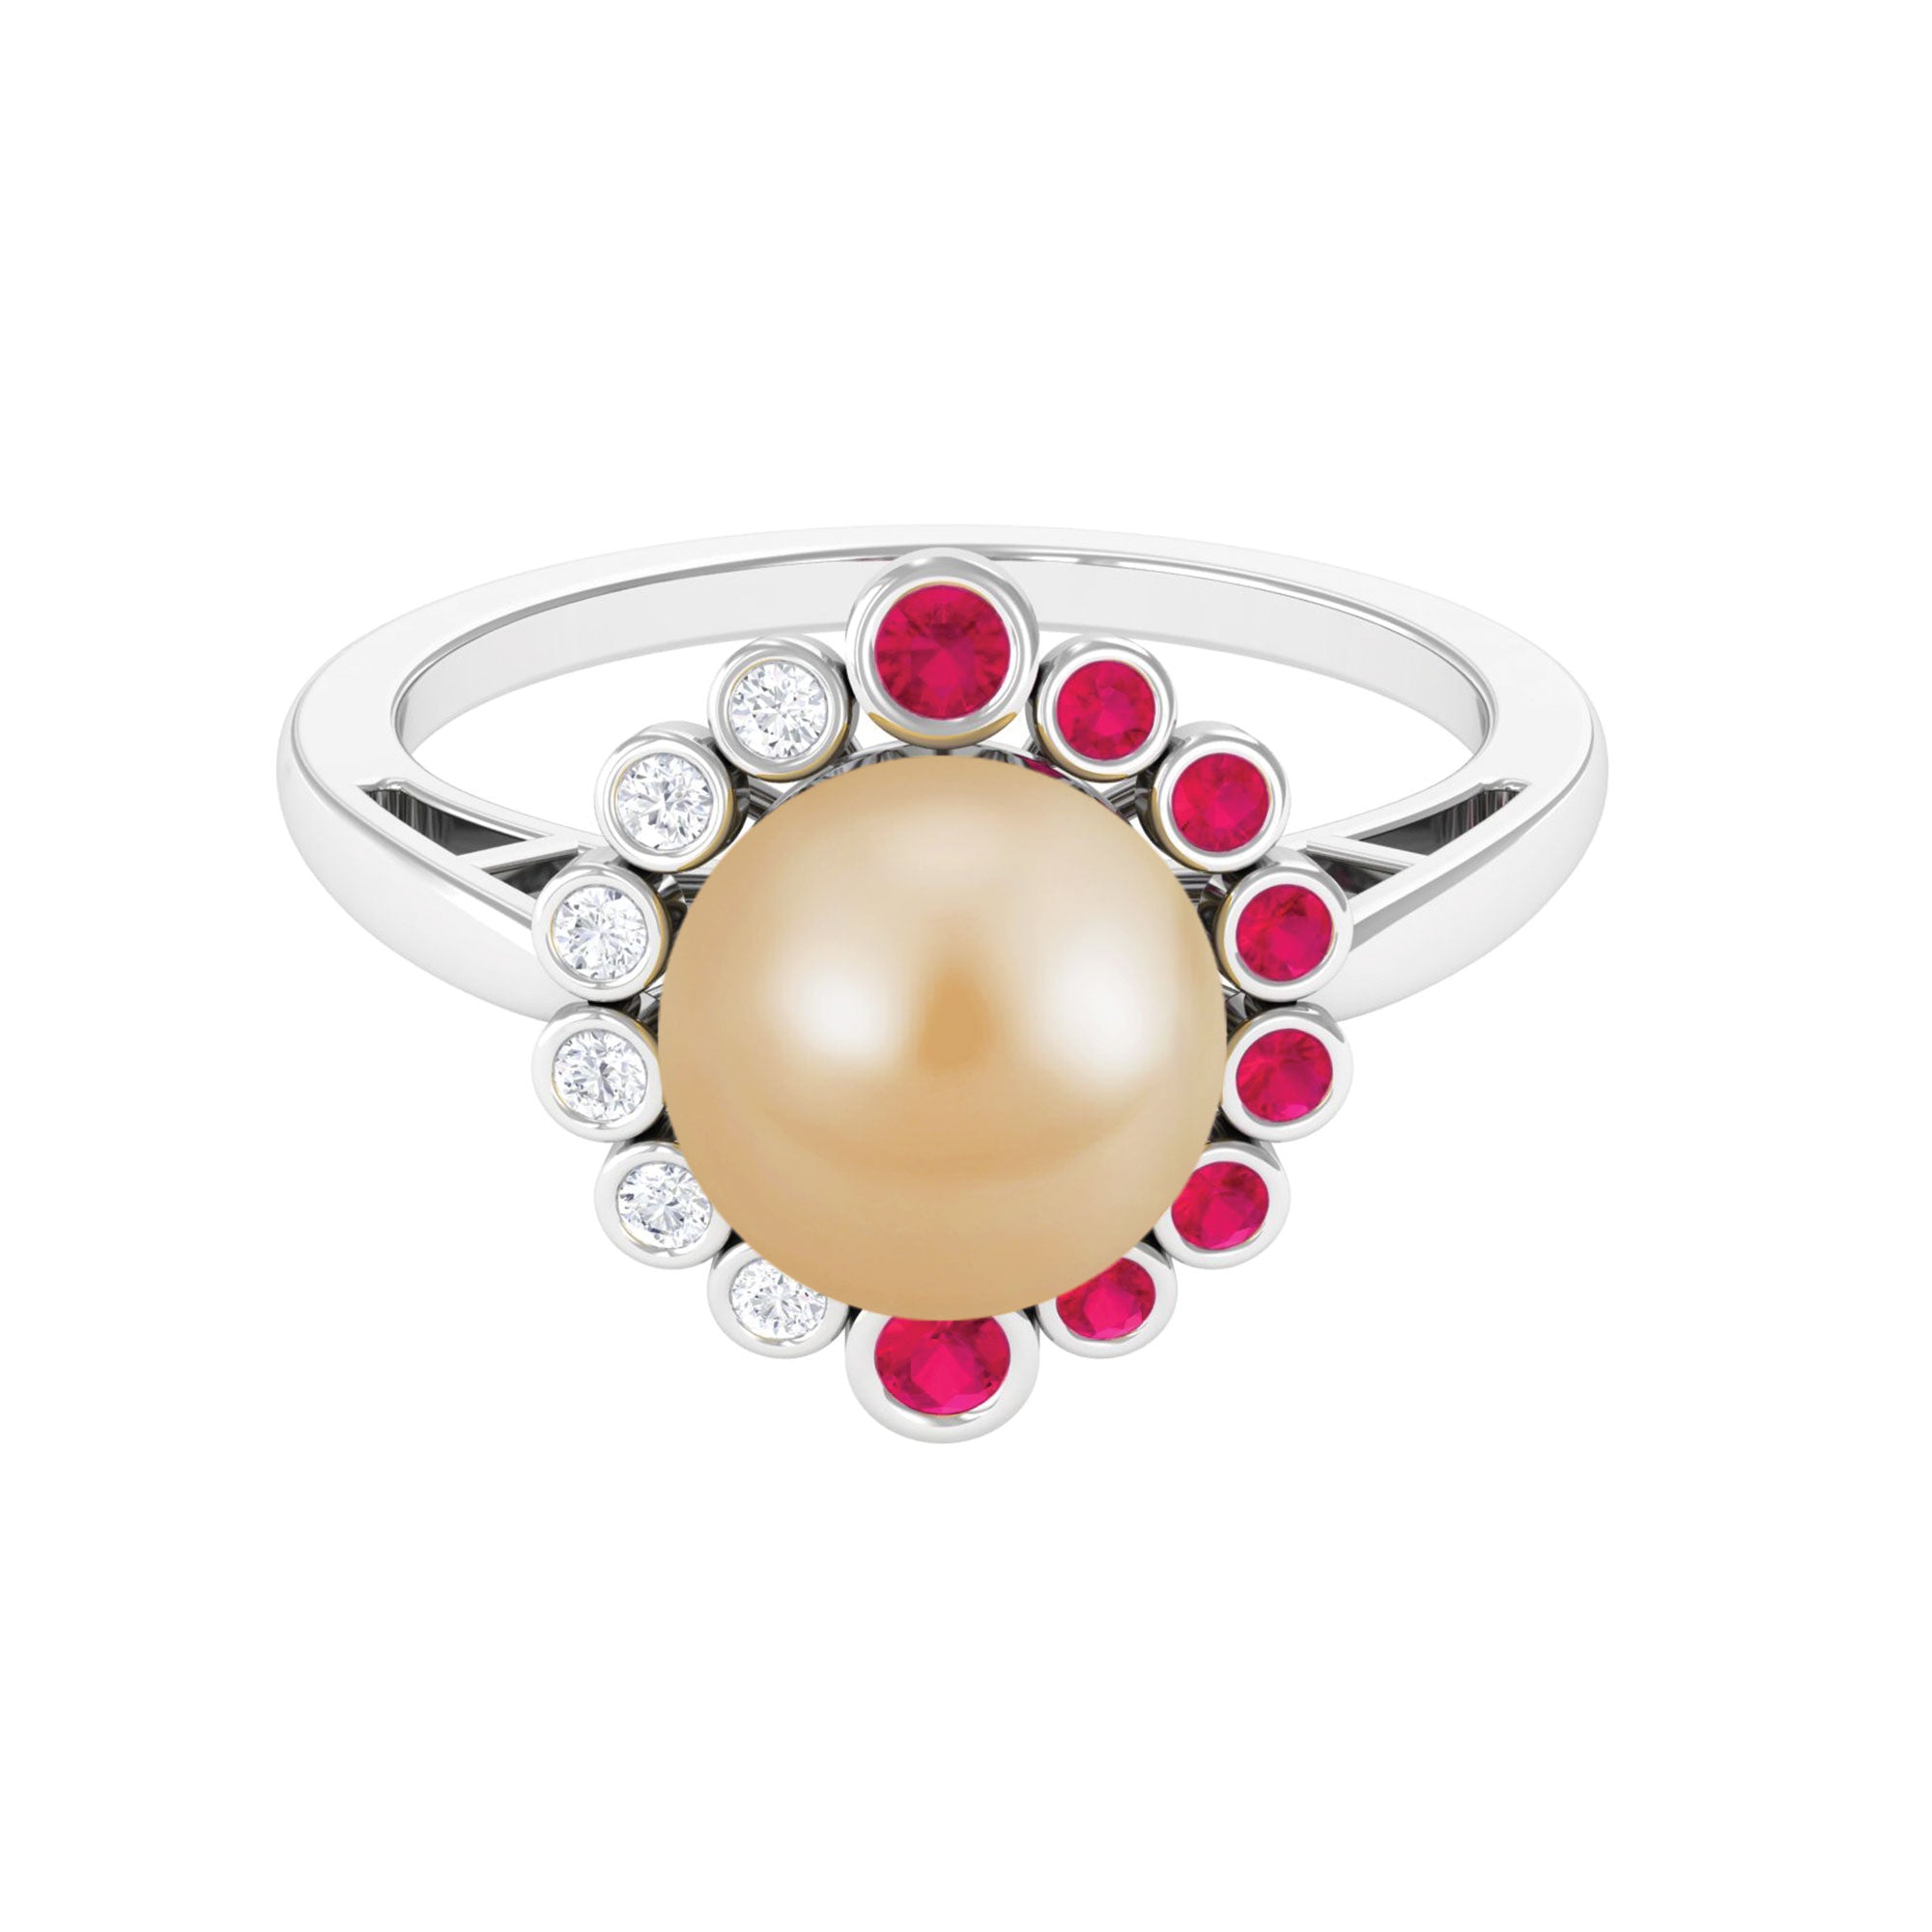 South Sea Pearl Halo Statement Ring with Ruby and Diamond South Sea Pearl-AAA Quality - Arisha Jewels